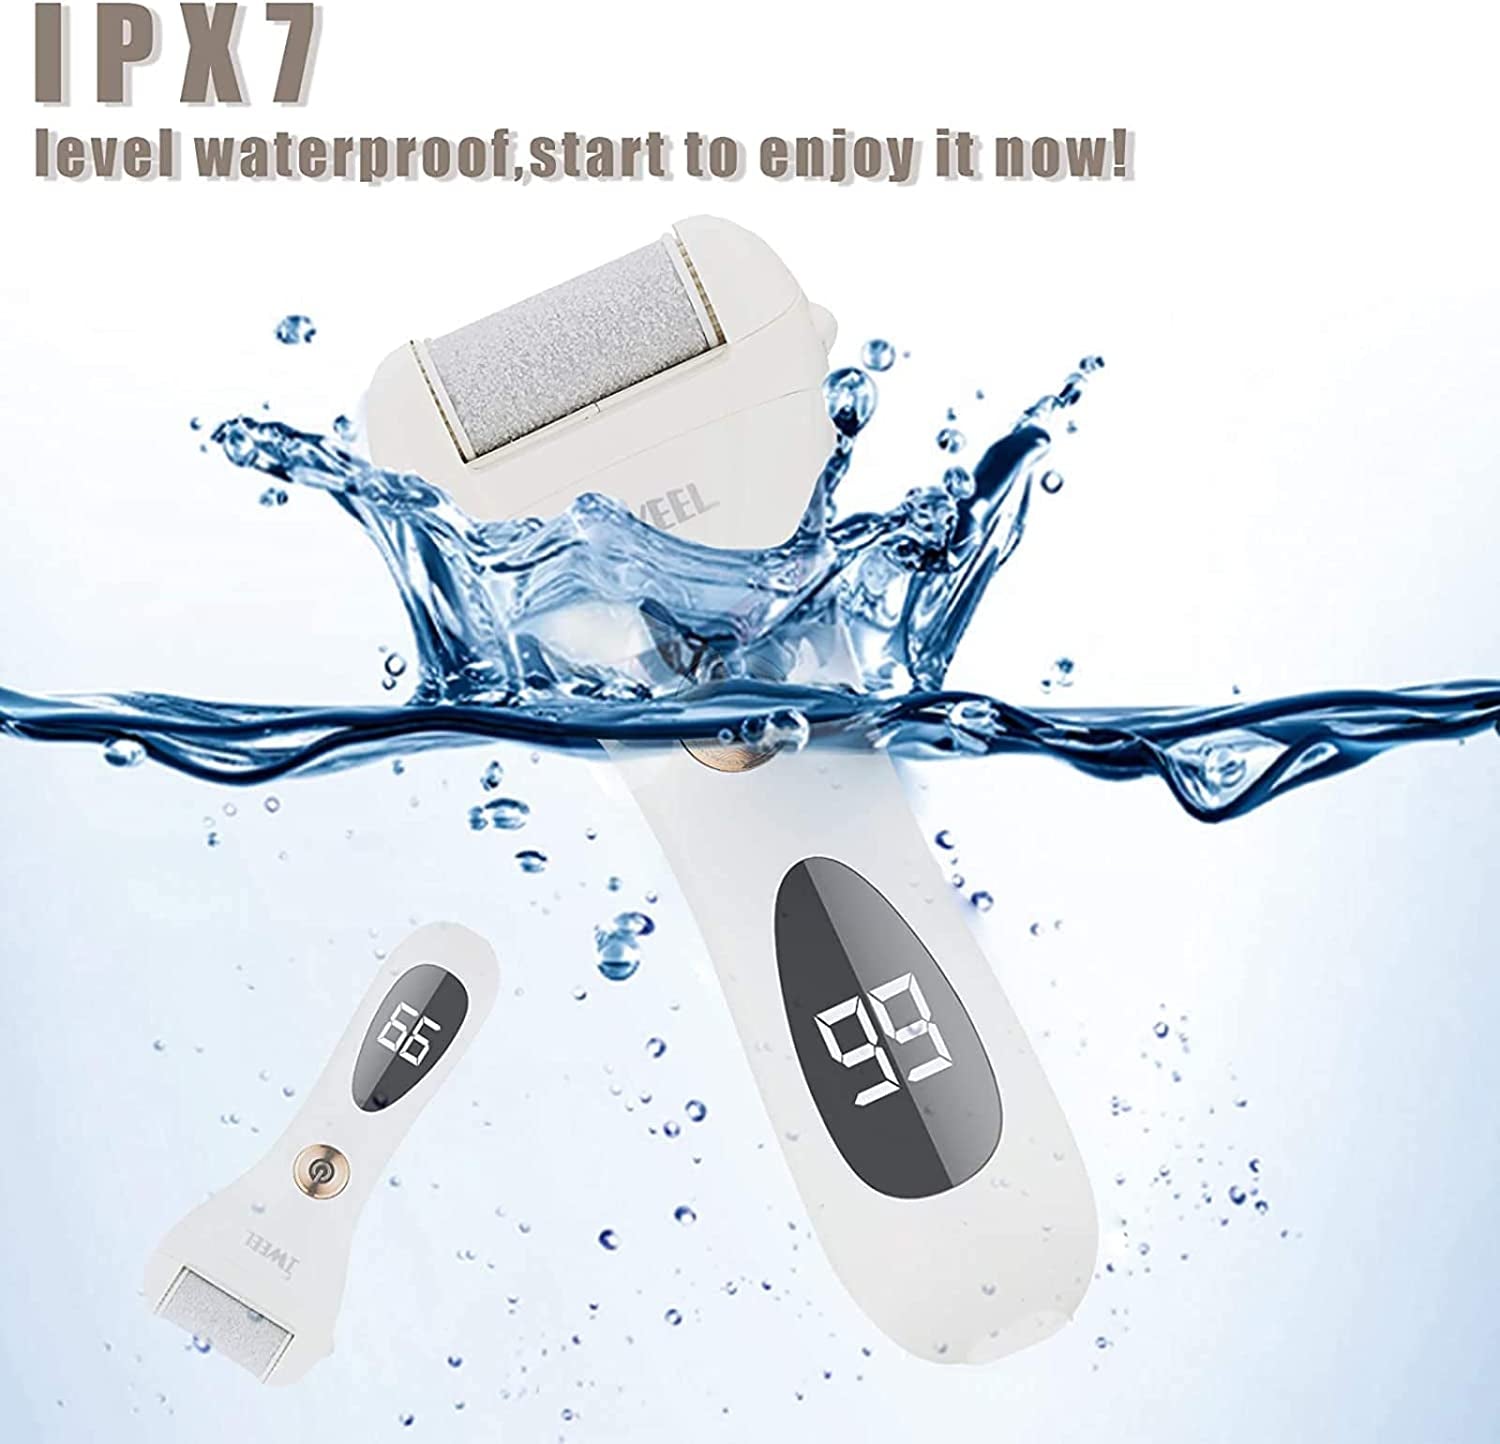 Callus Remover for Feet Shaver Rechargeable Electric Foot File Pedicure Tools for Feet Professional Callous Shaver Waterproof Pedicure Kit for Cracked Heels and Dead Skin